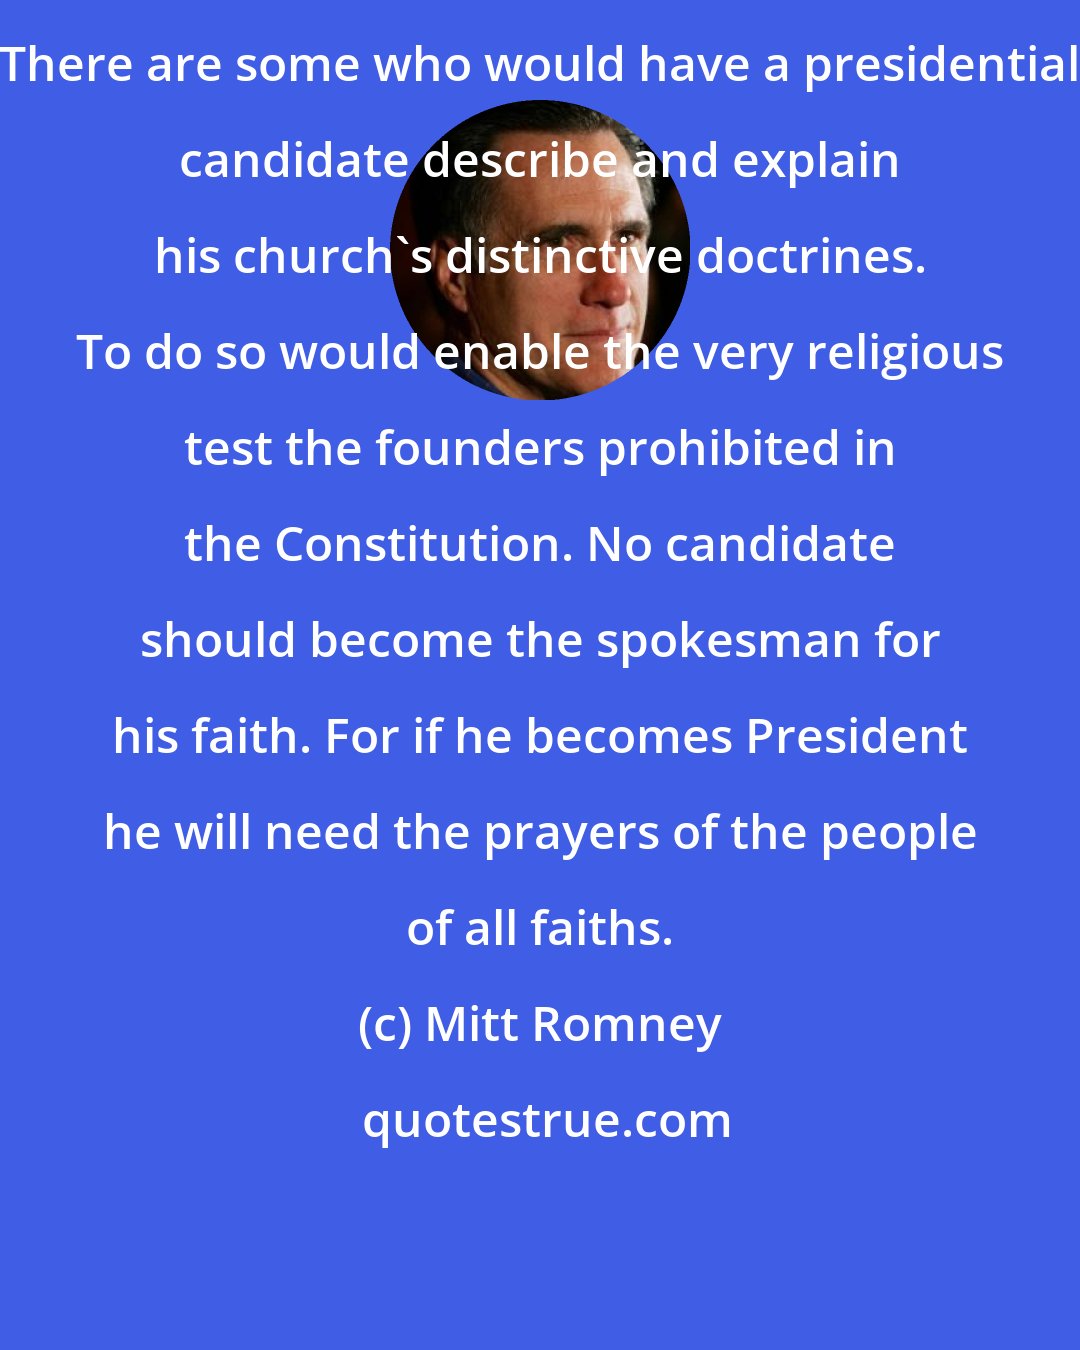 Mitt Romney: There are some who would have a presidential candidate describe and explain his church's distinctive doctrines. To do so would enable the very religious test the founders prohibited in the Constitution. No candidate should become the spokesman for his faith. For if he becomes President he will need the prayers of the people of all faiths.